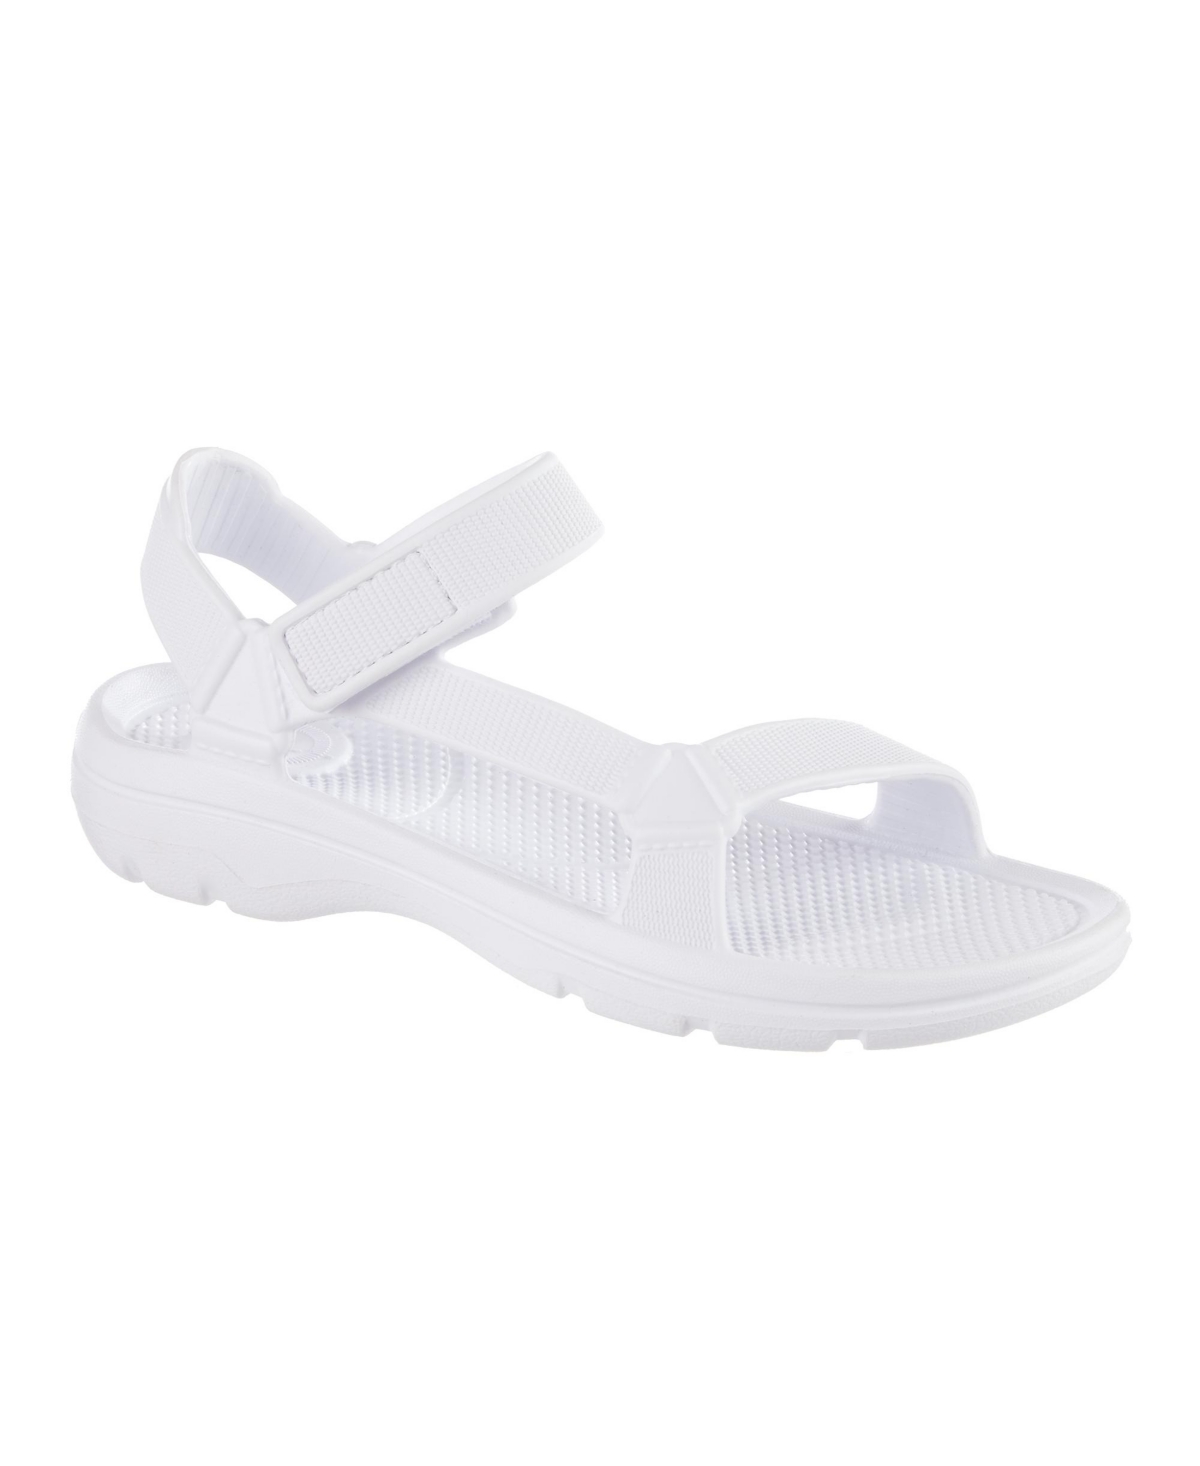 Totes Women's Riley Adjustable Sport Sandals With Everywear In White